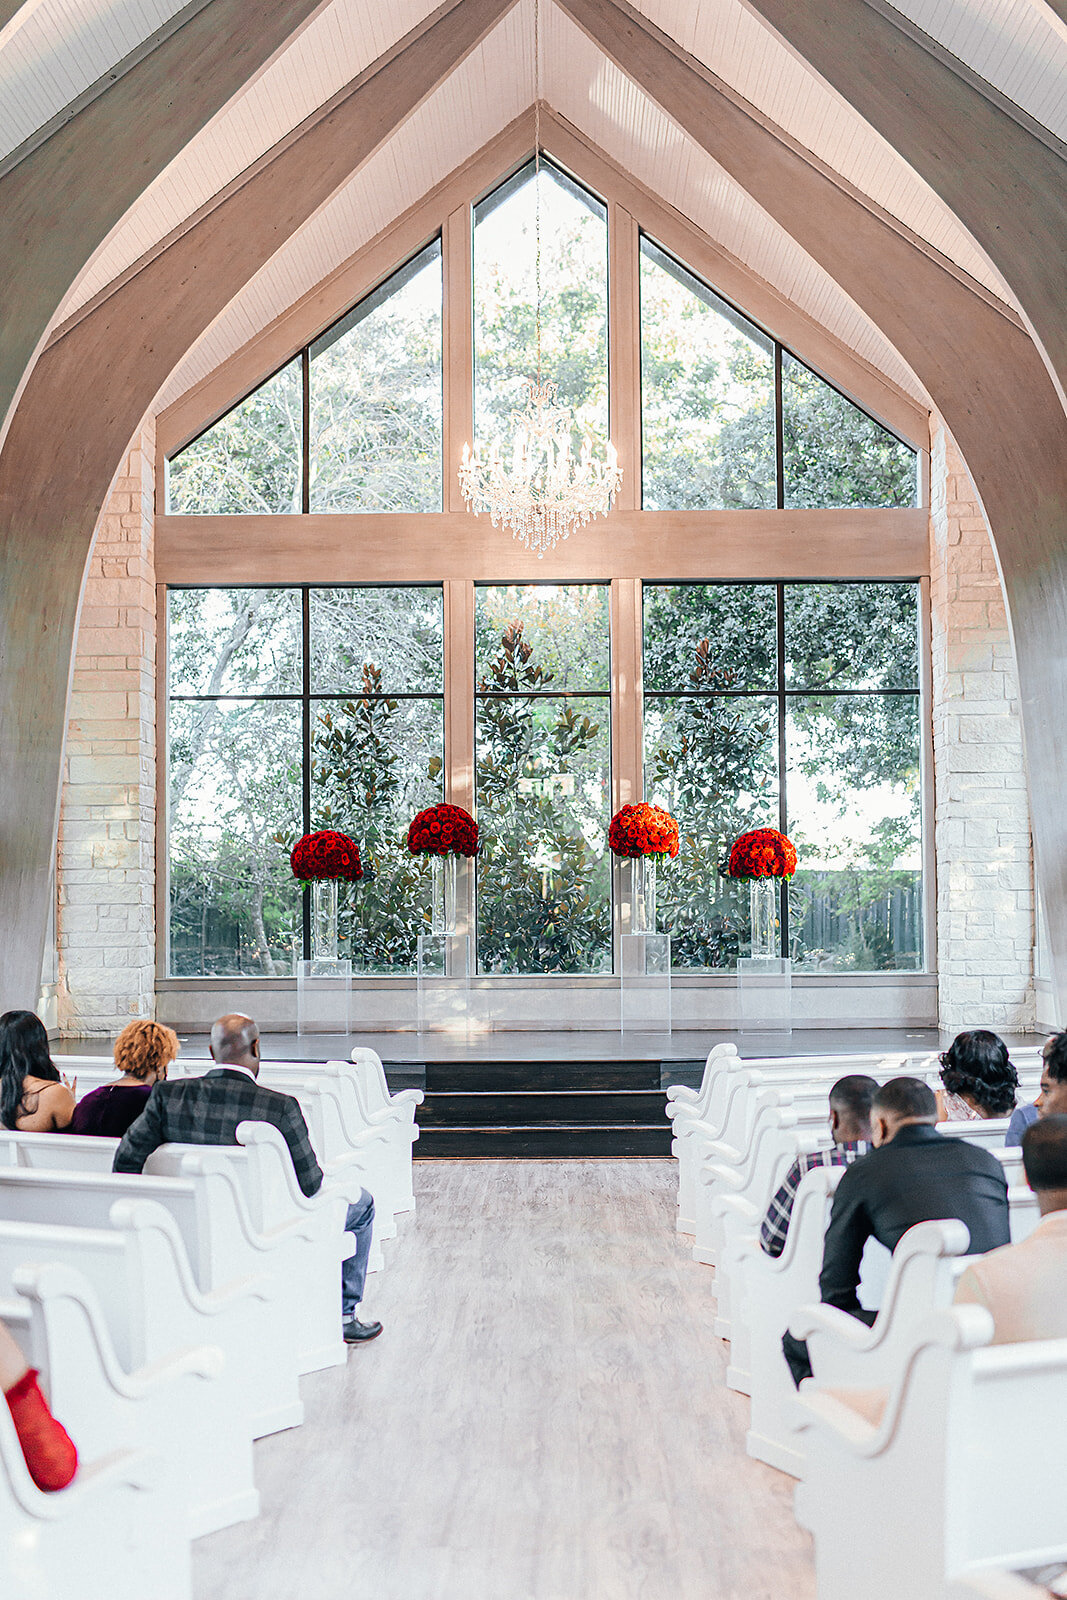 Church aisle for wedding ceremony with large window and red flower arrangements